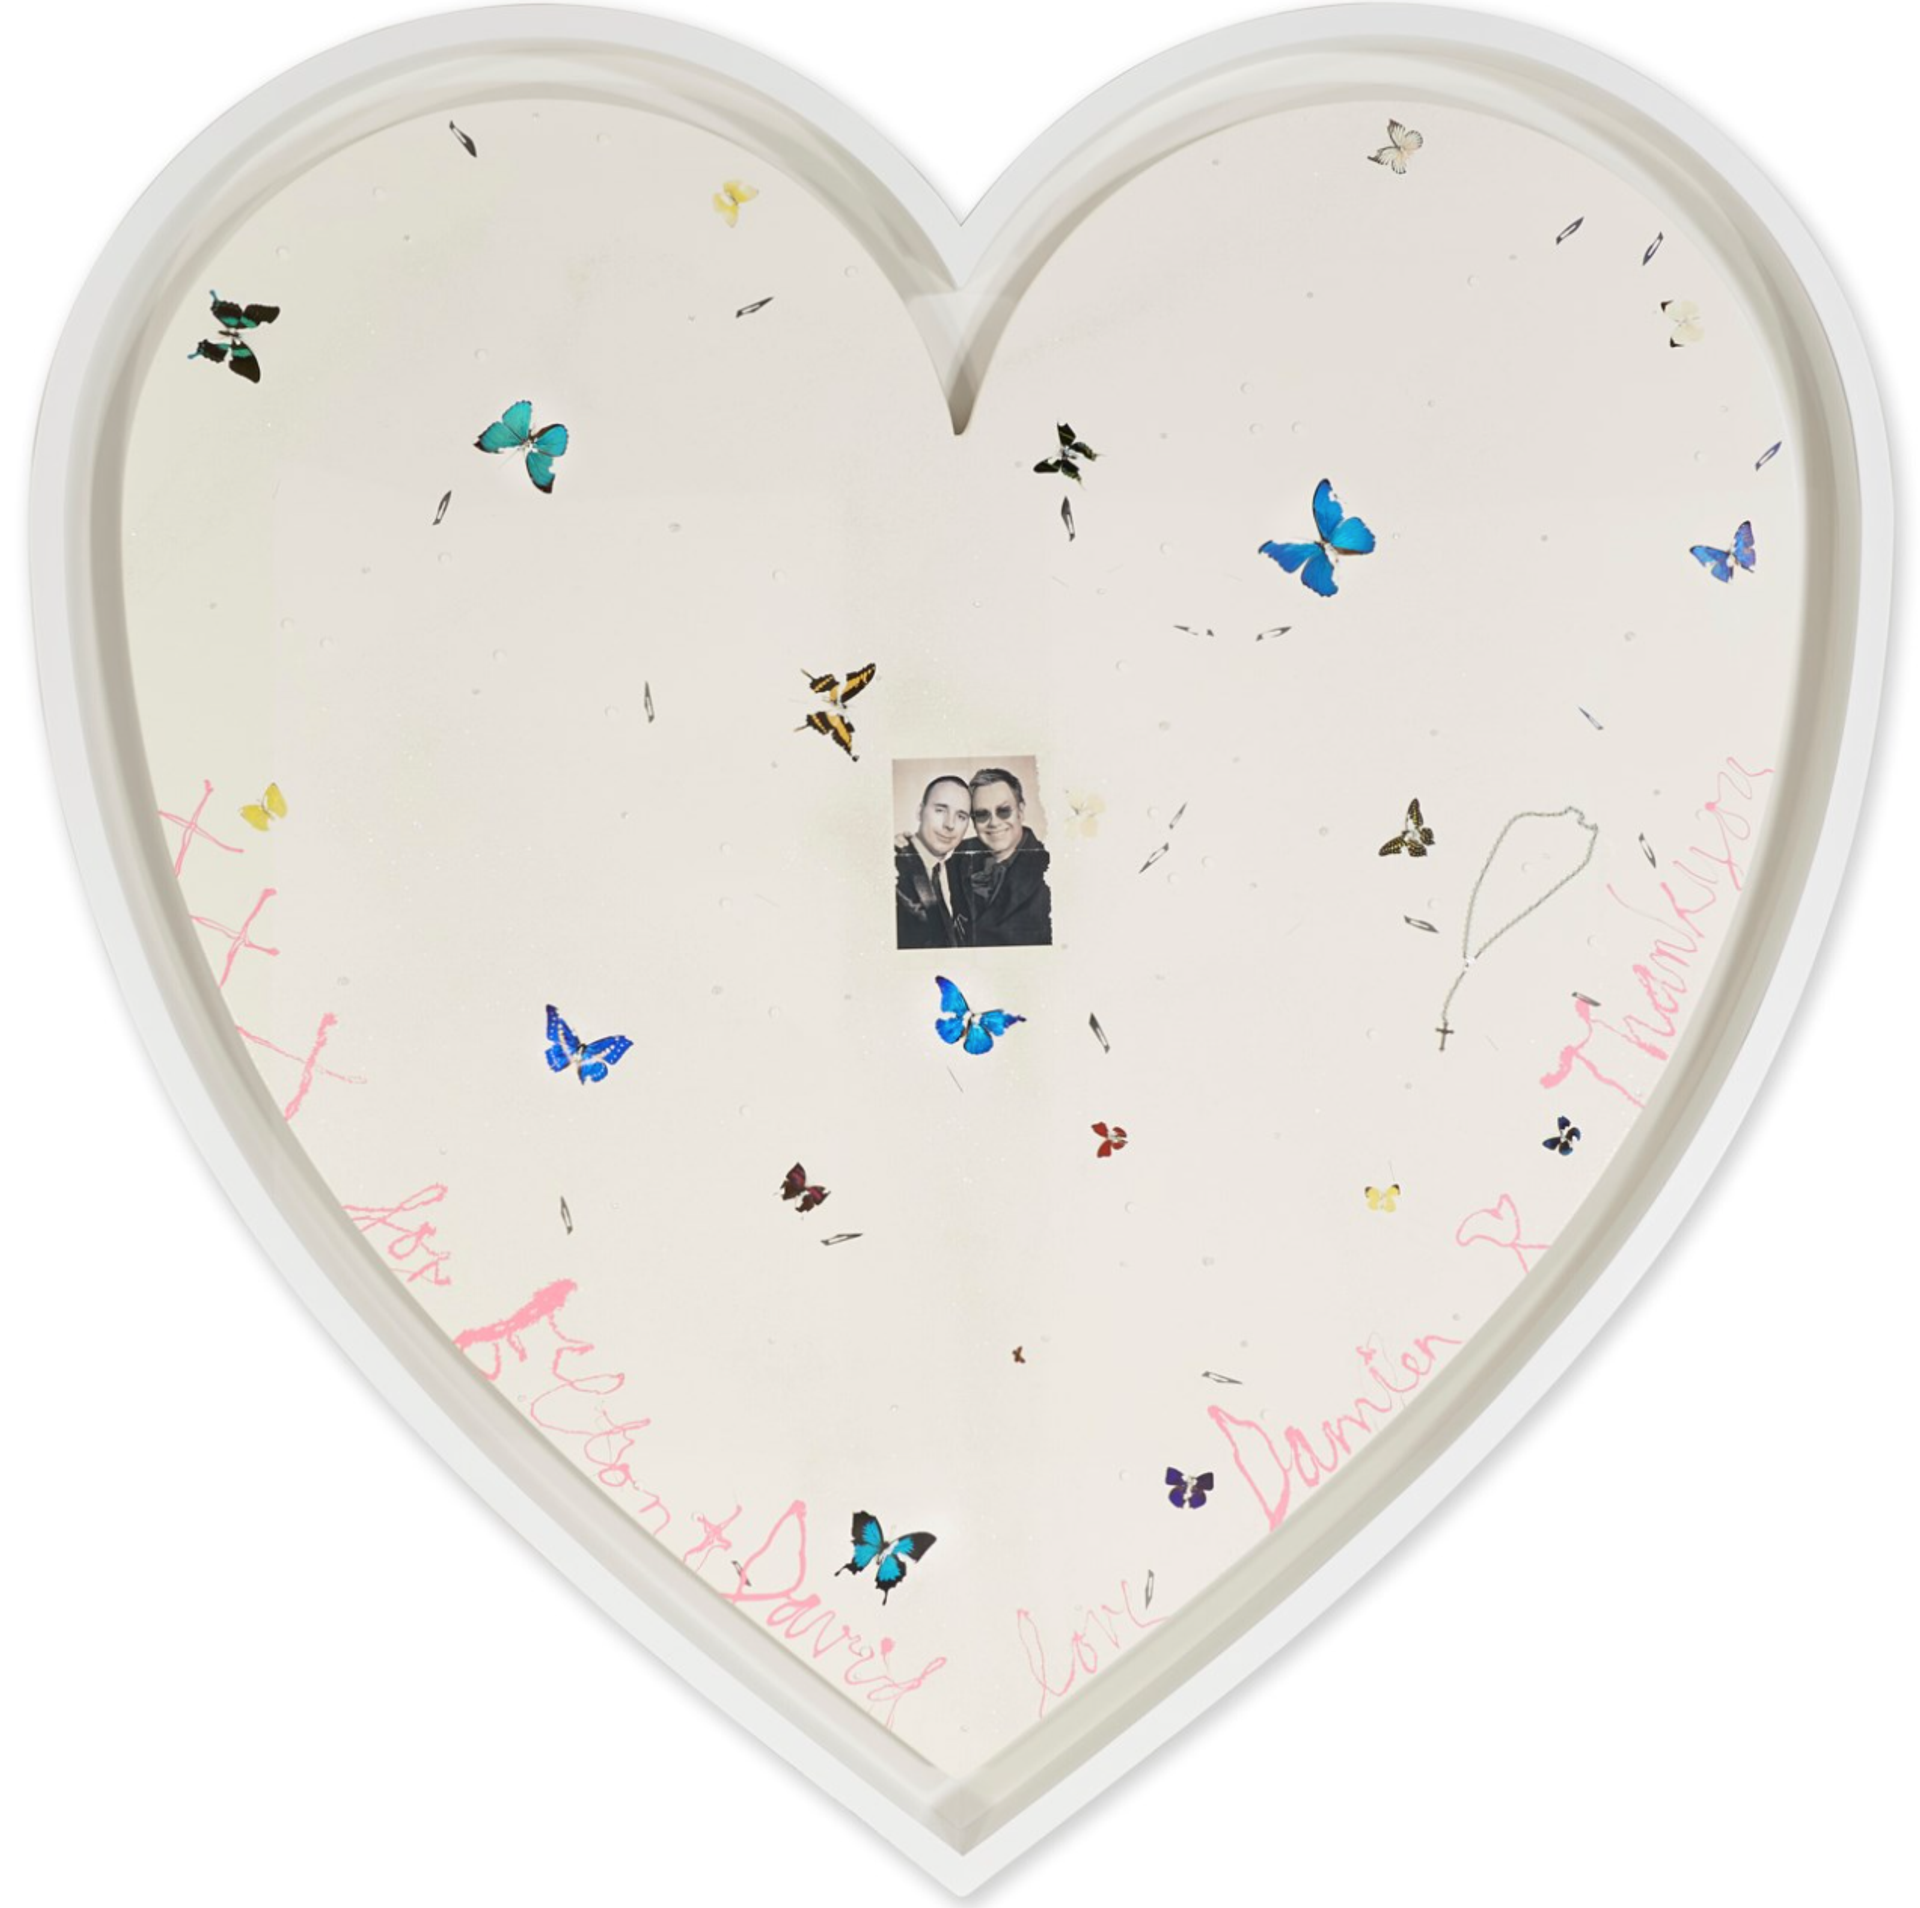 A heart-shaped canvas is scattered with butterflies surrounding a portrait of Elton John and his partner David Furness. Damien Hirst has signed it in pink.